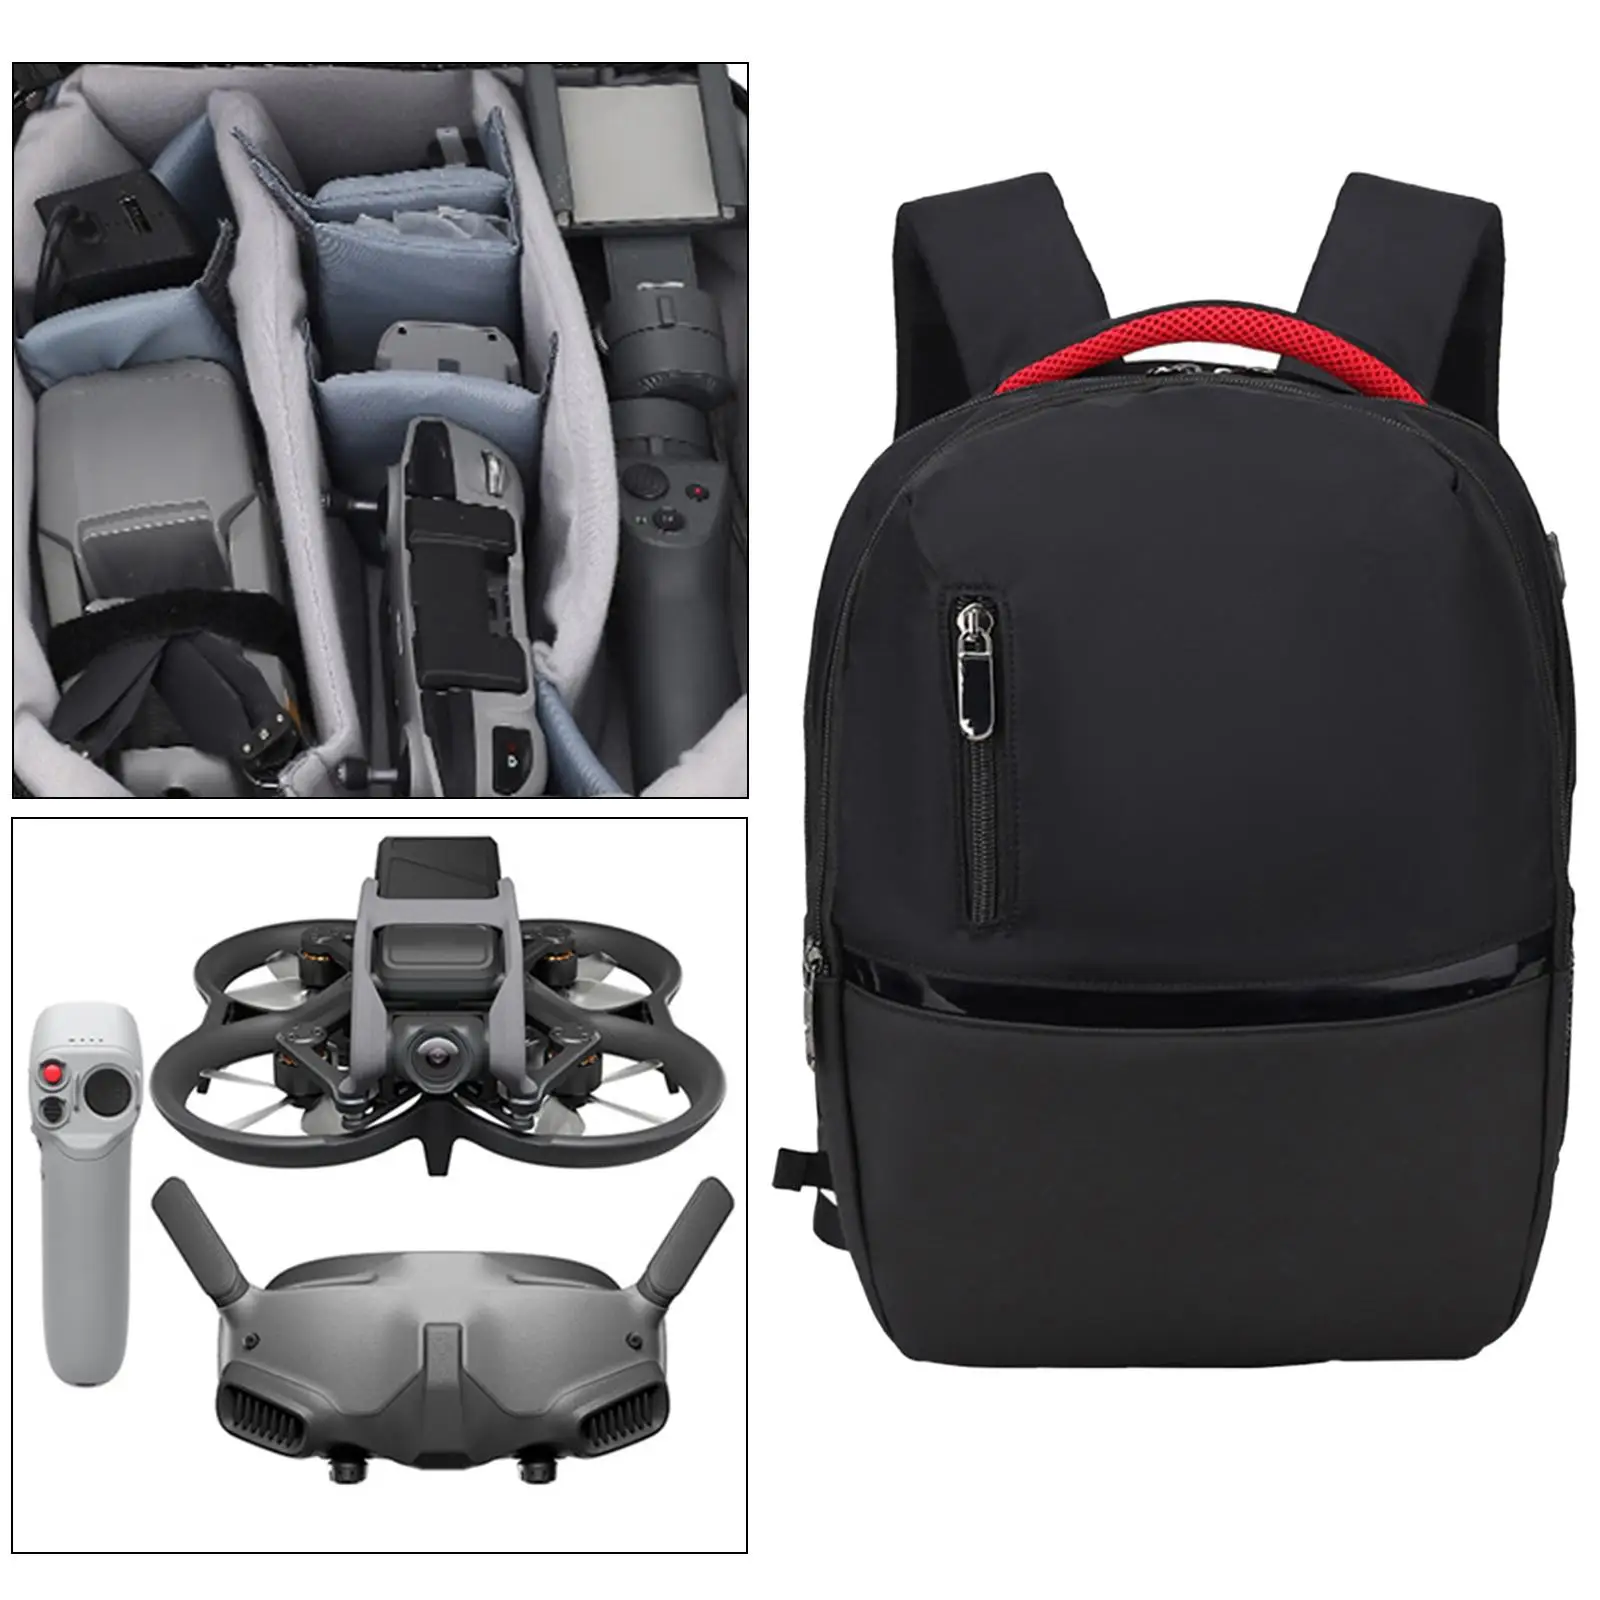 Travel Drone Carrying Handbag Large Capacity Suitcaseg Waterproof Travel Bag Multifunction Drone Backpack for Drone Accessories